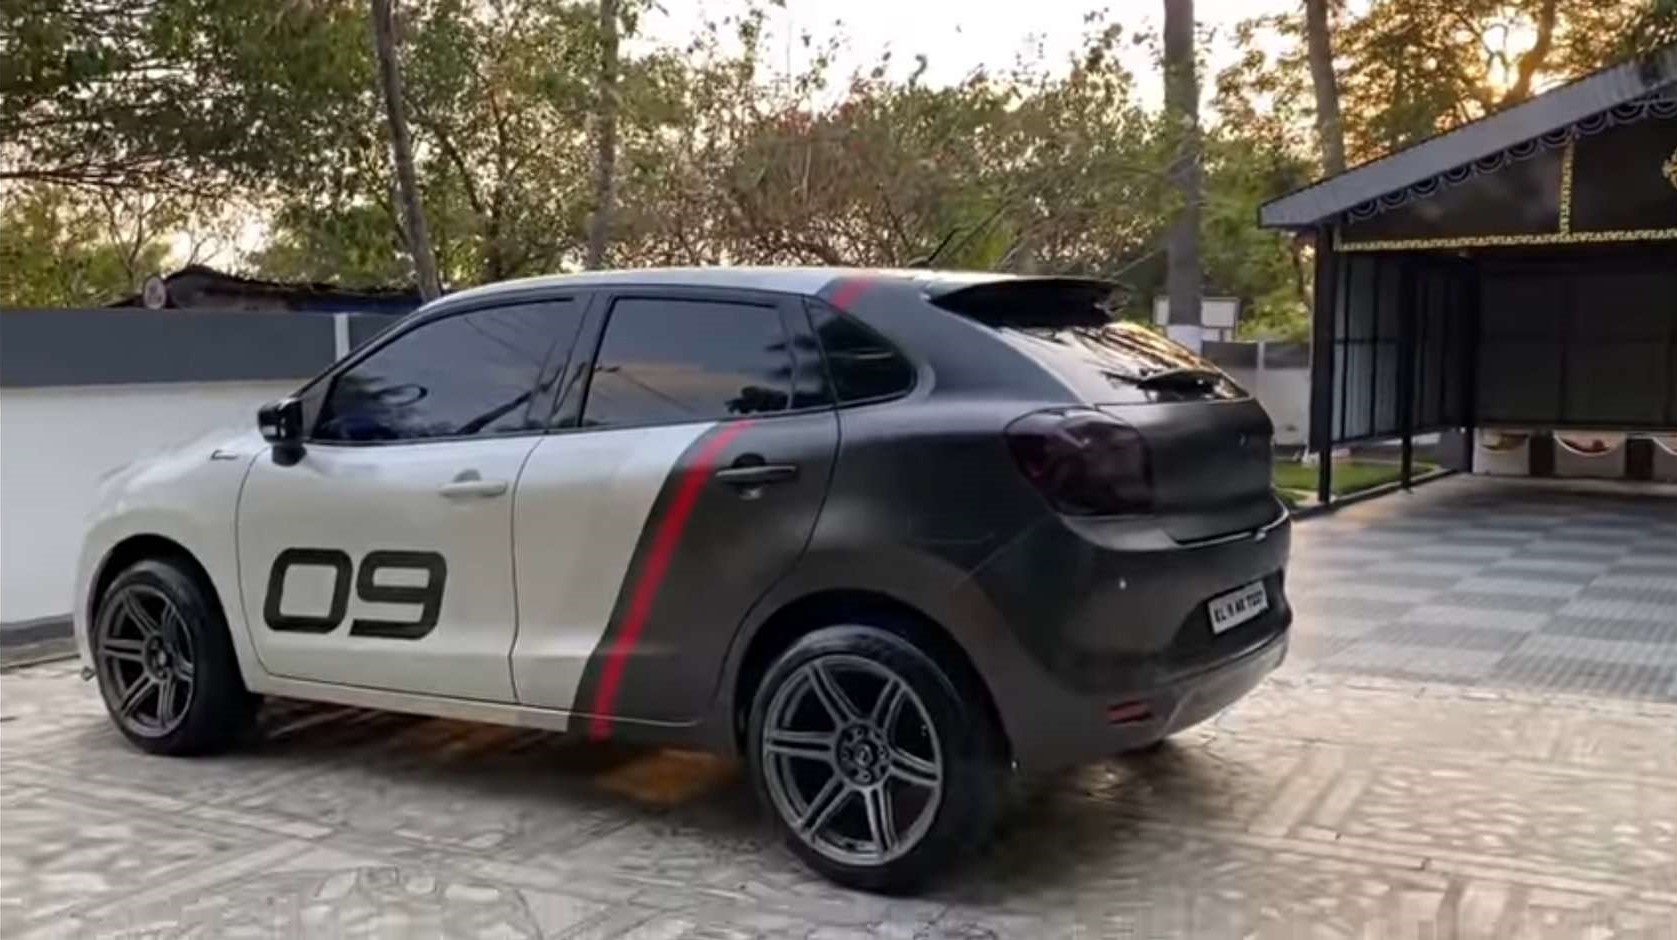 This modified Maruti Baleno  has one of the coolest wraps 